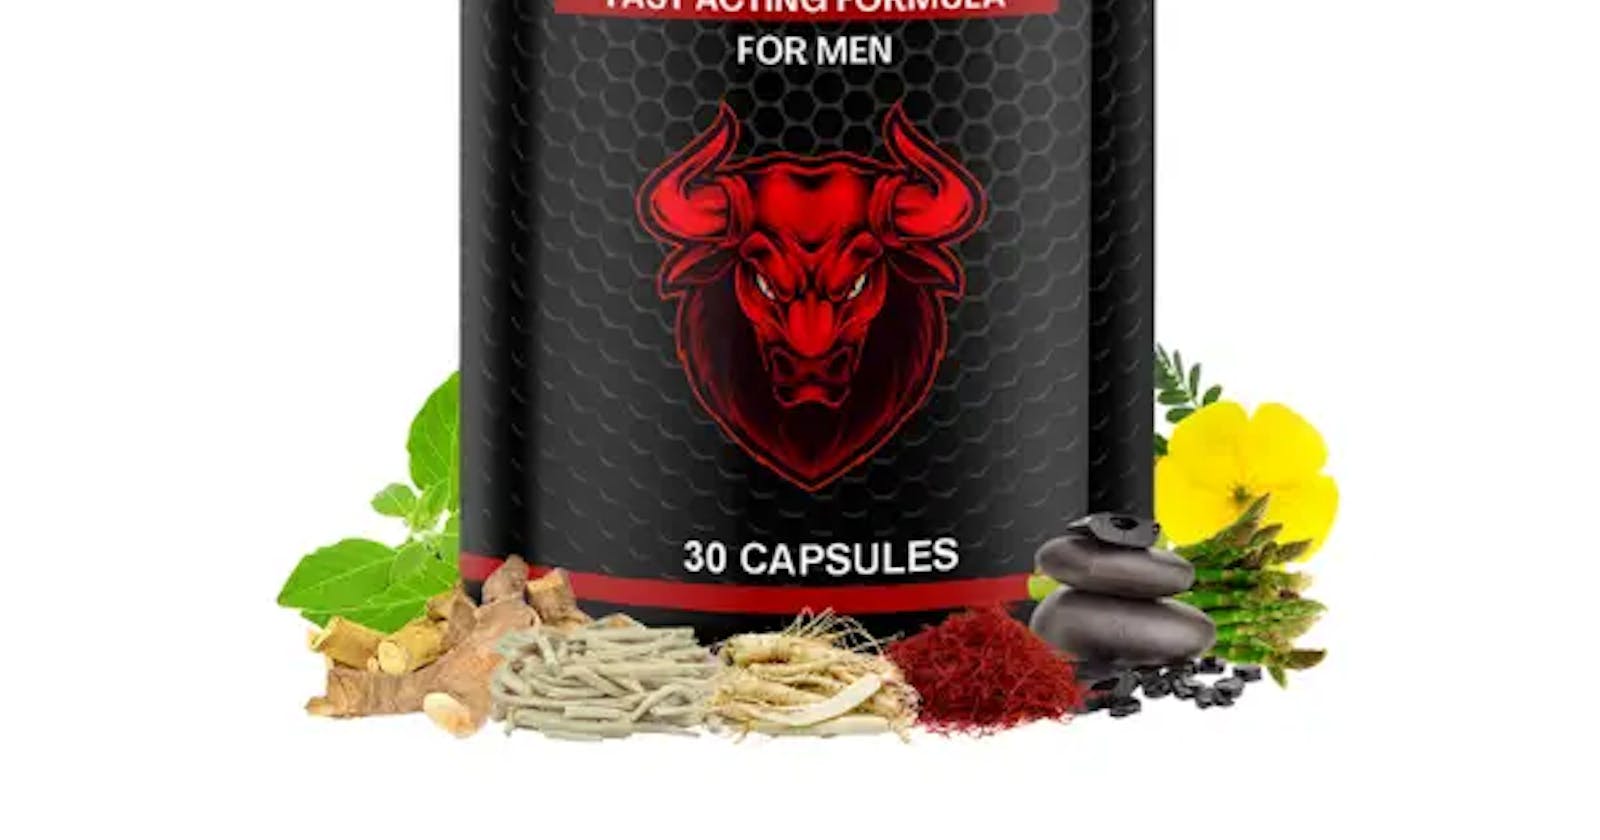 Black Bull Male Enhancement Ingredients, Price & Where to Buy?